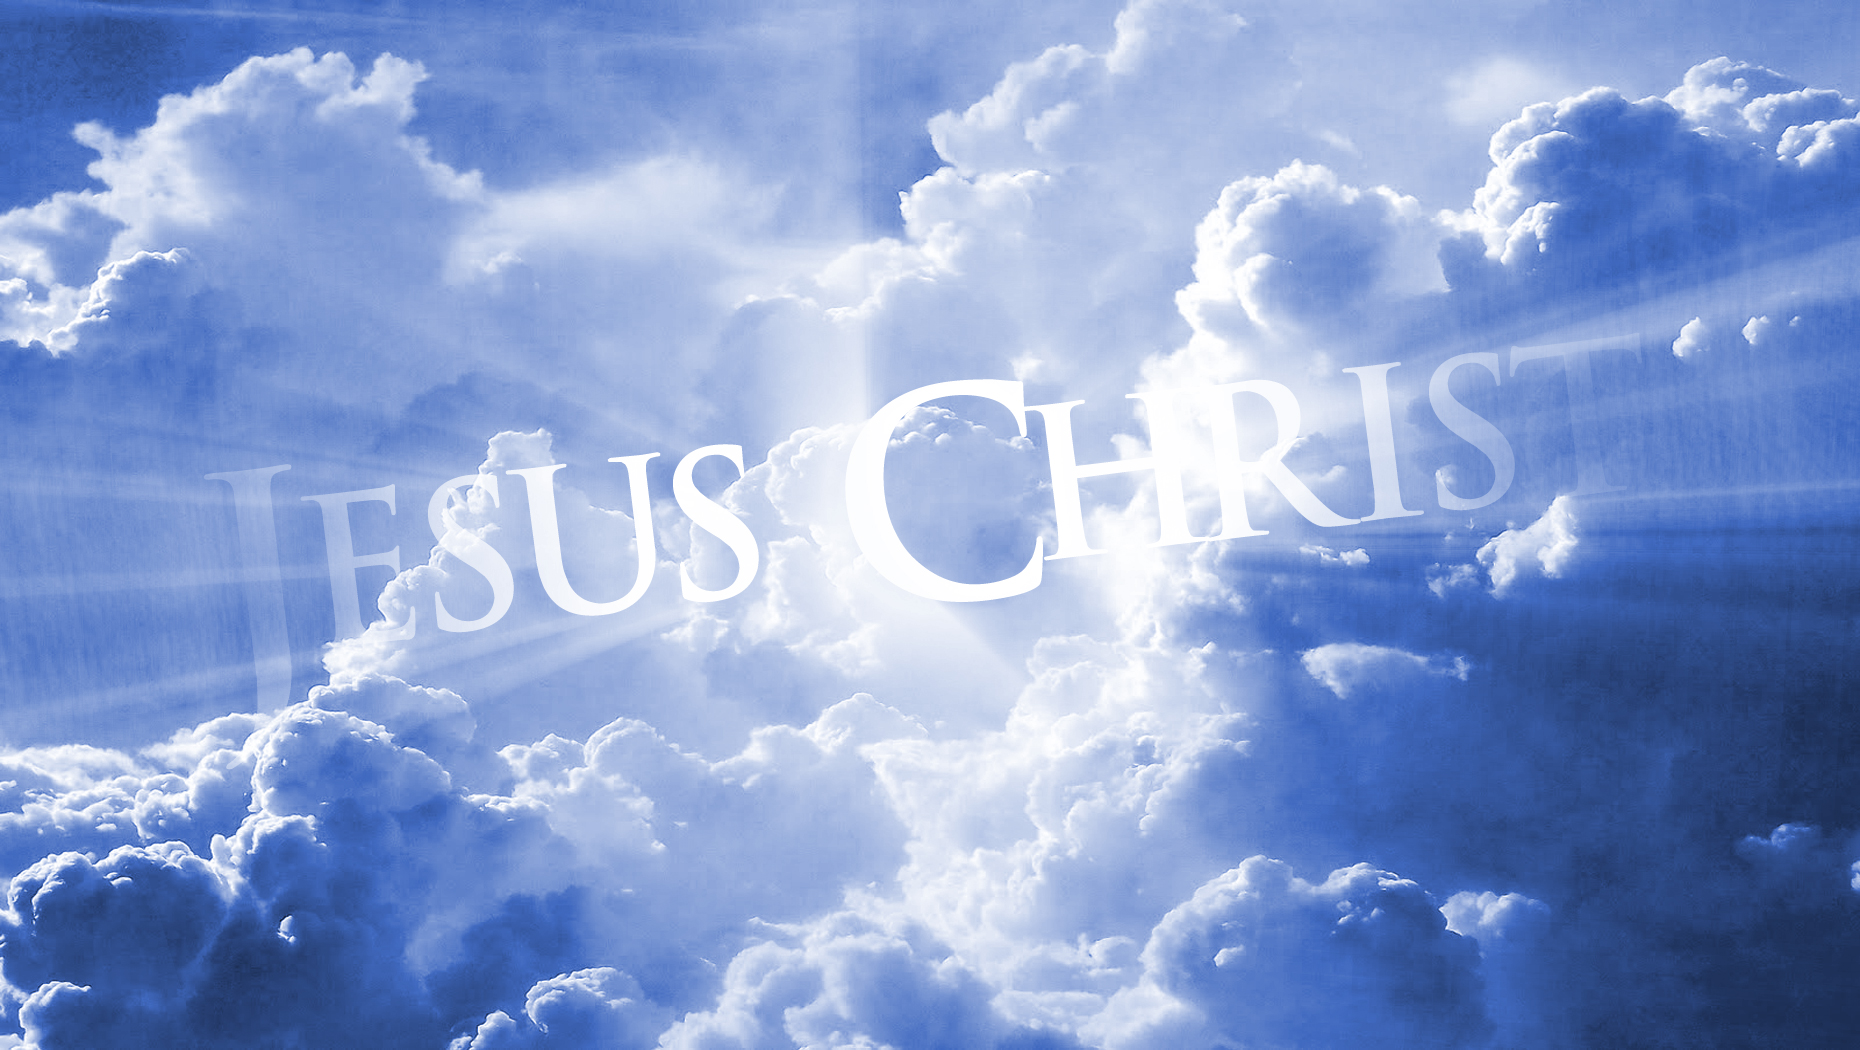  Christ in Heaven Wallpaper   Christian Wallpapers and Backgrounds